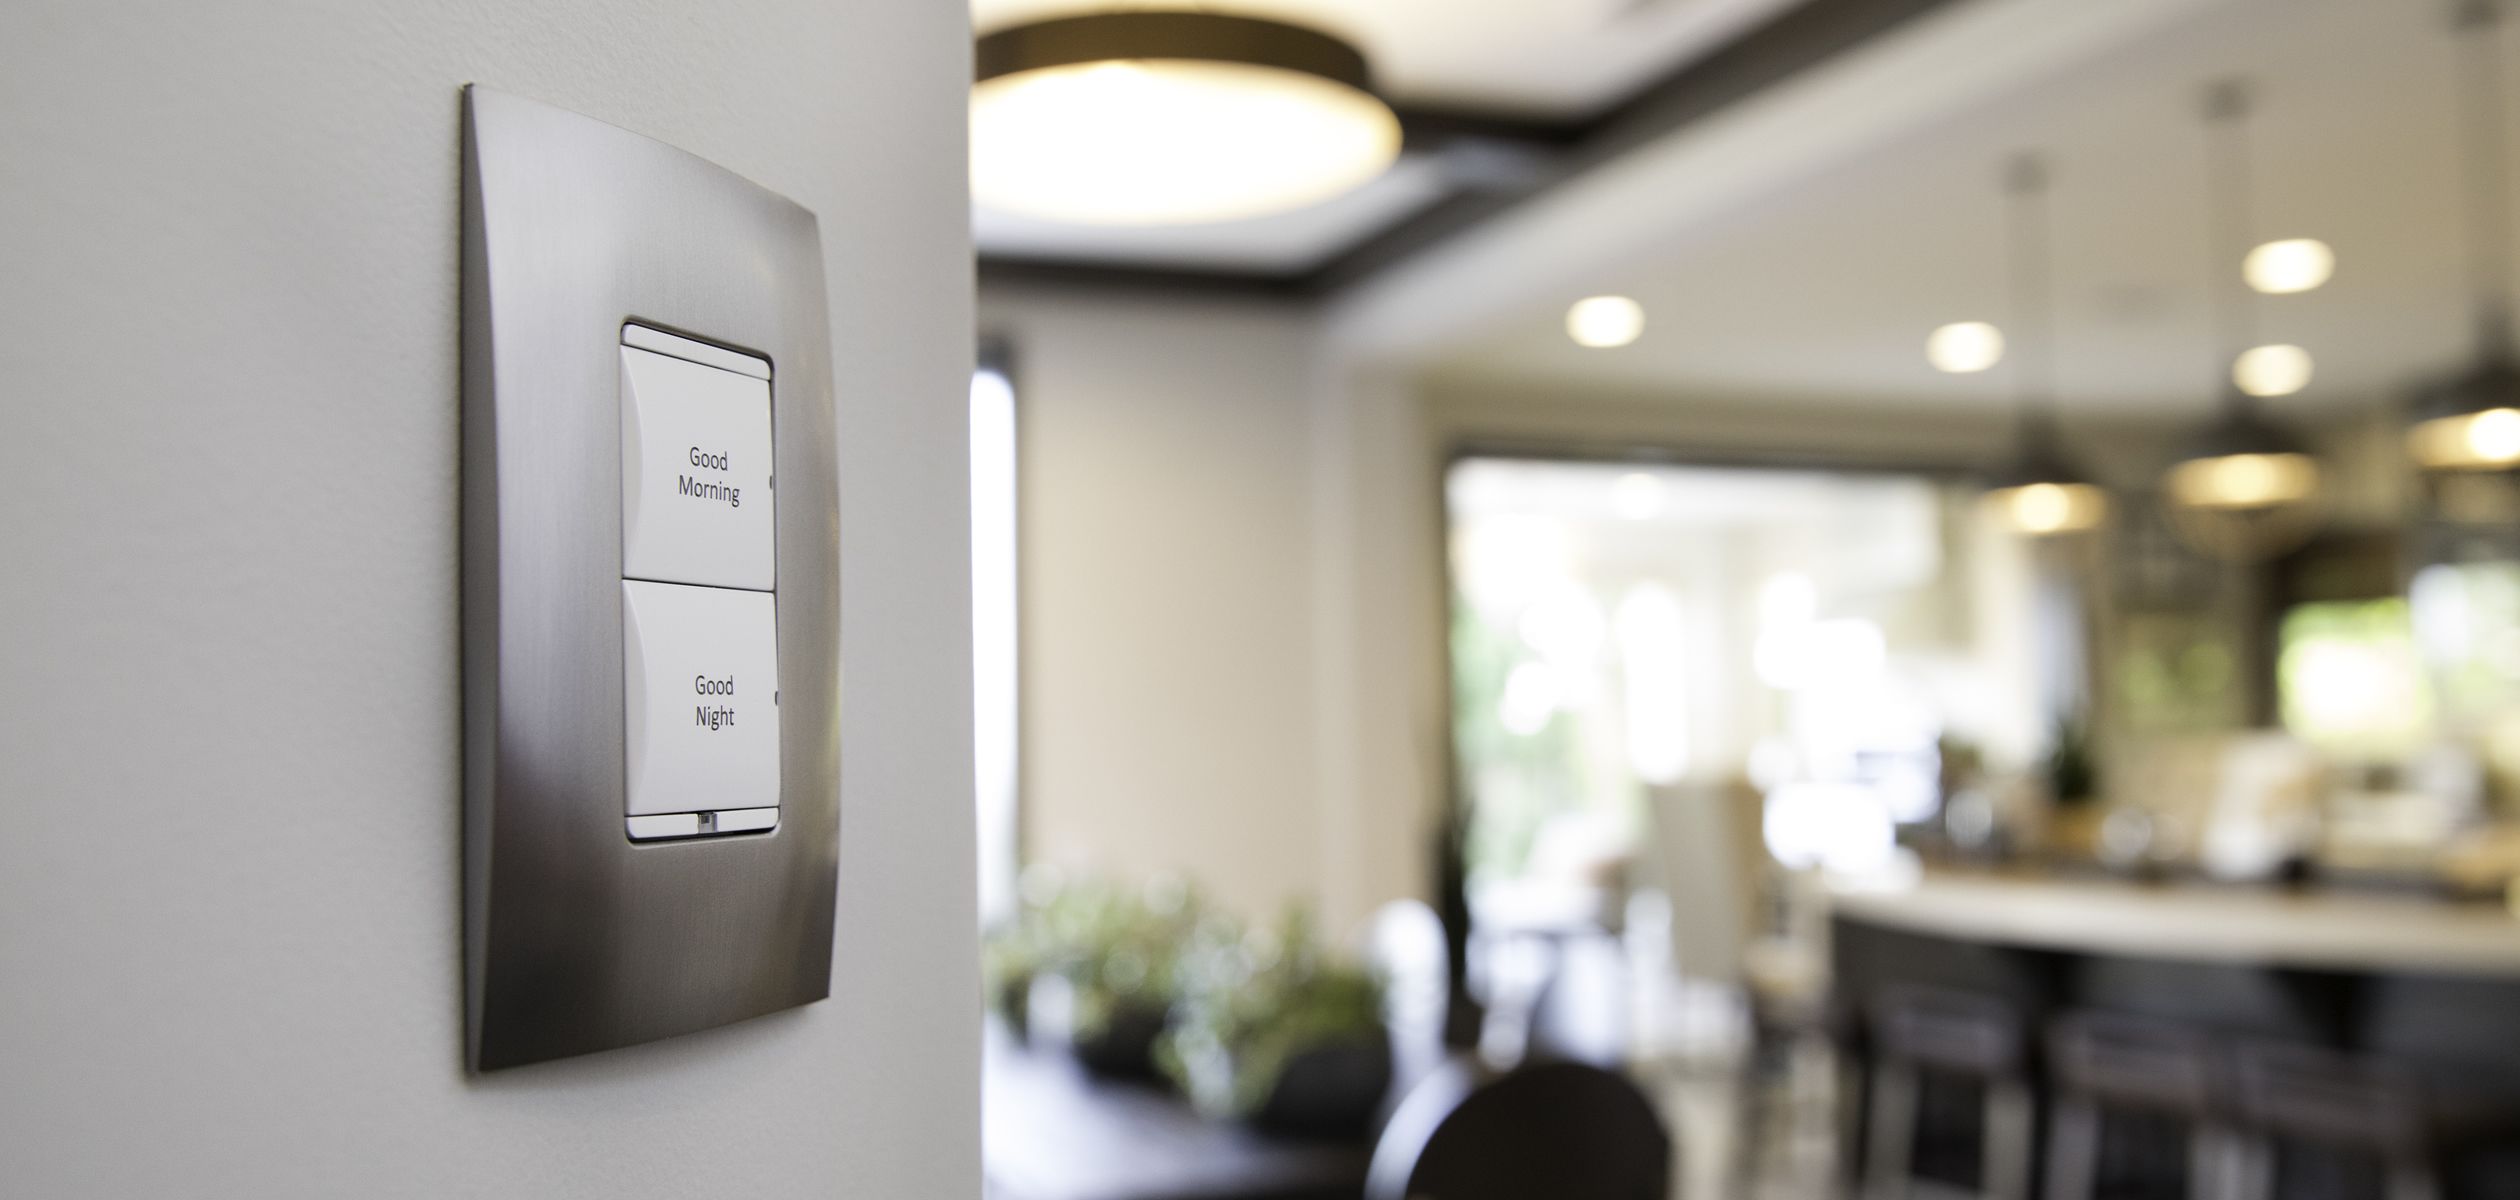 control4 dayton oh, smart home automation, control4 keypad, lighting control, interface, security